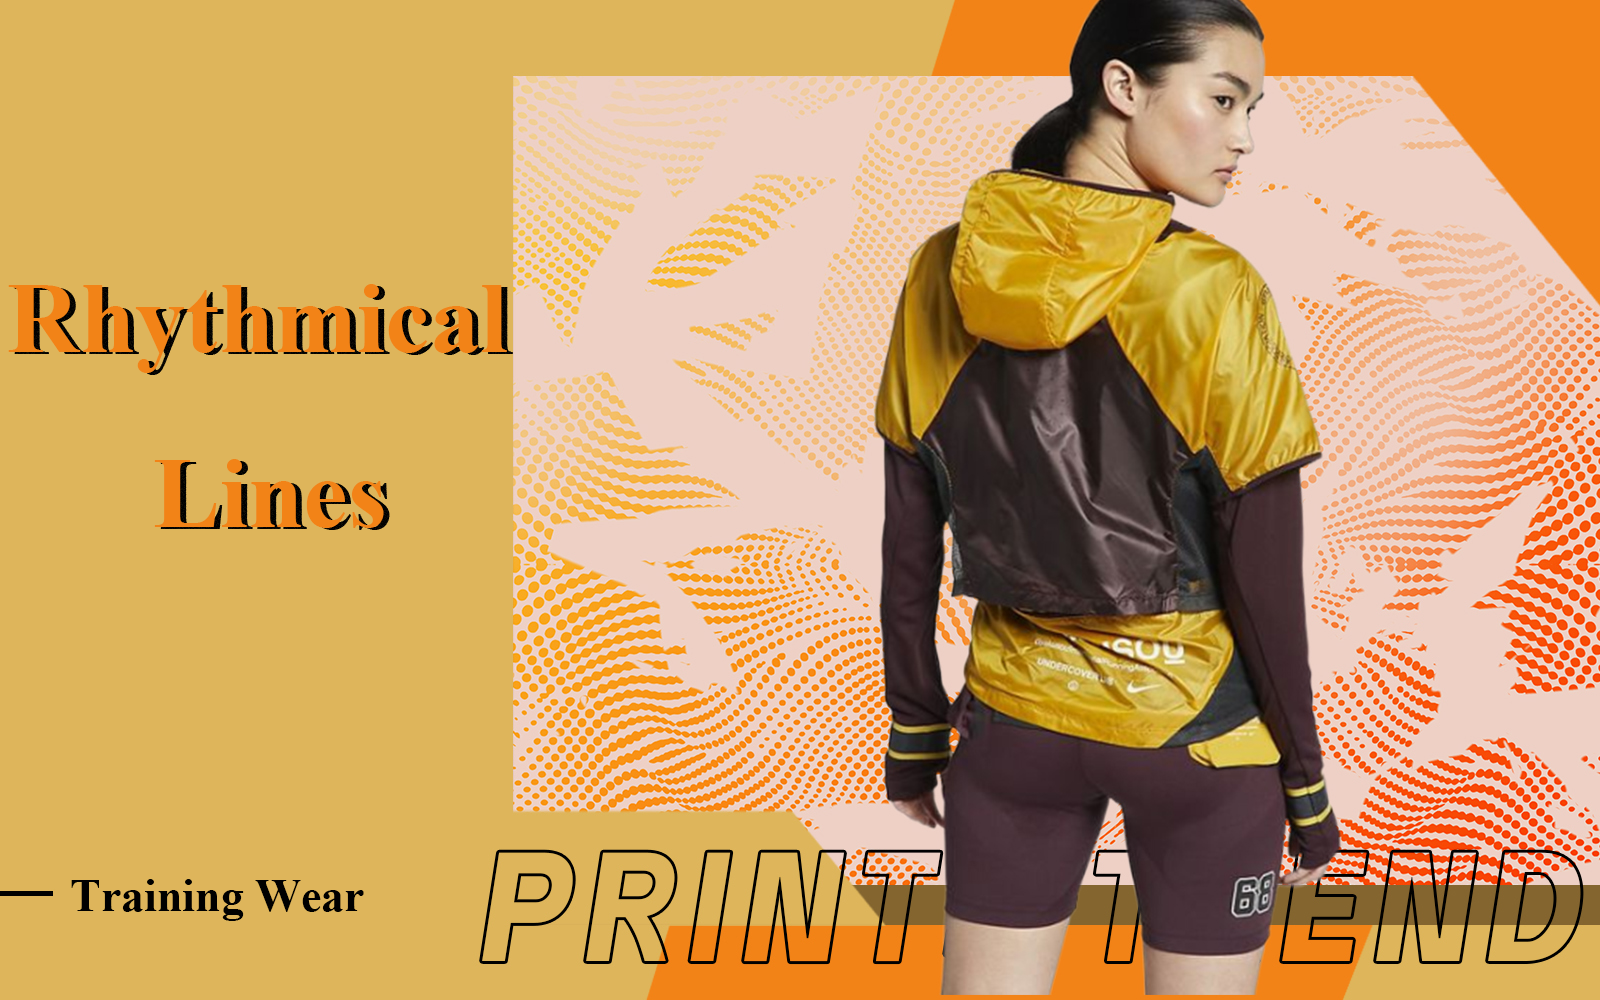 Rhythmic Lines -- The Pattern Trend for Training Wear